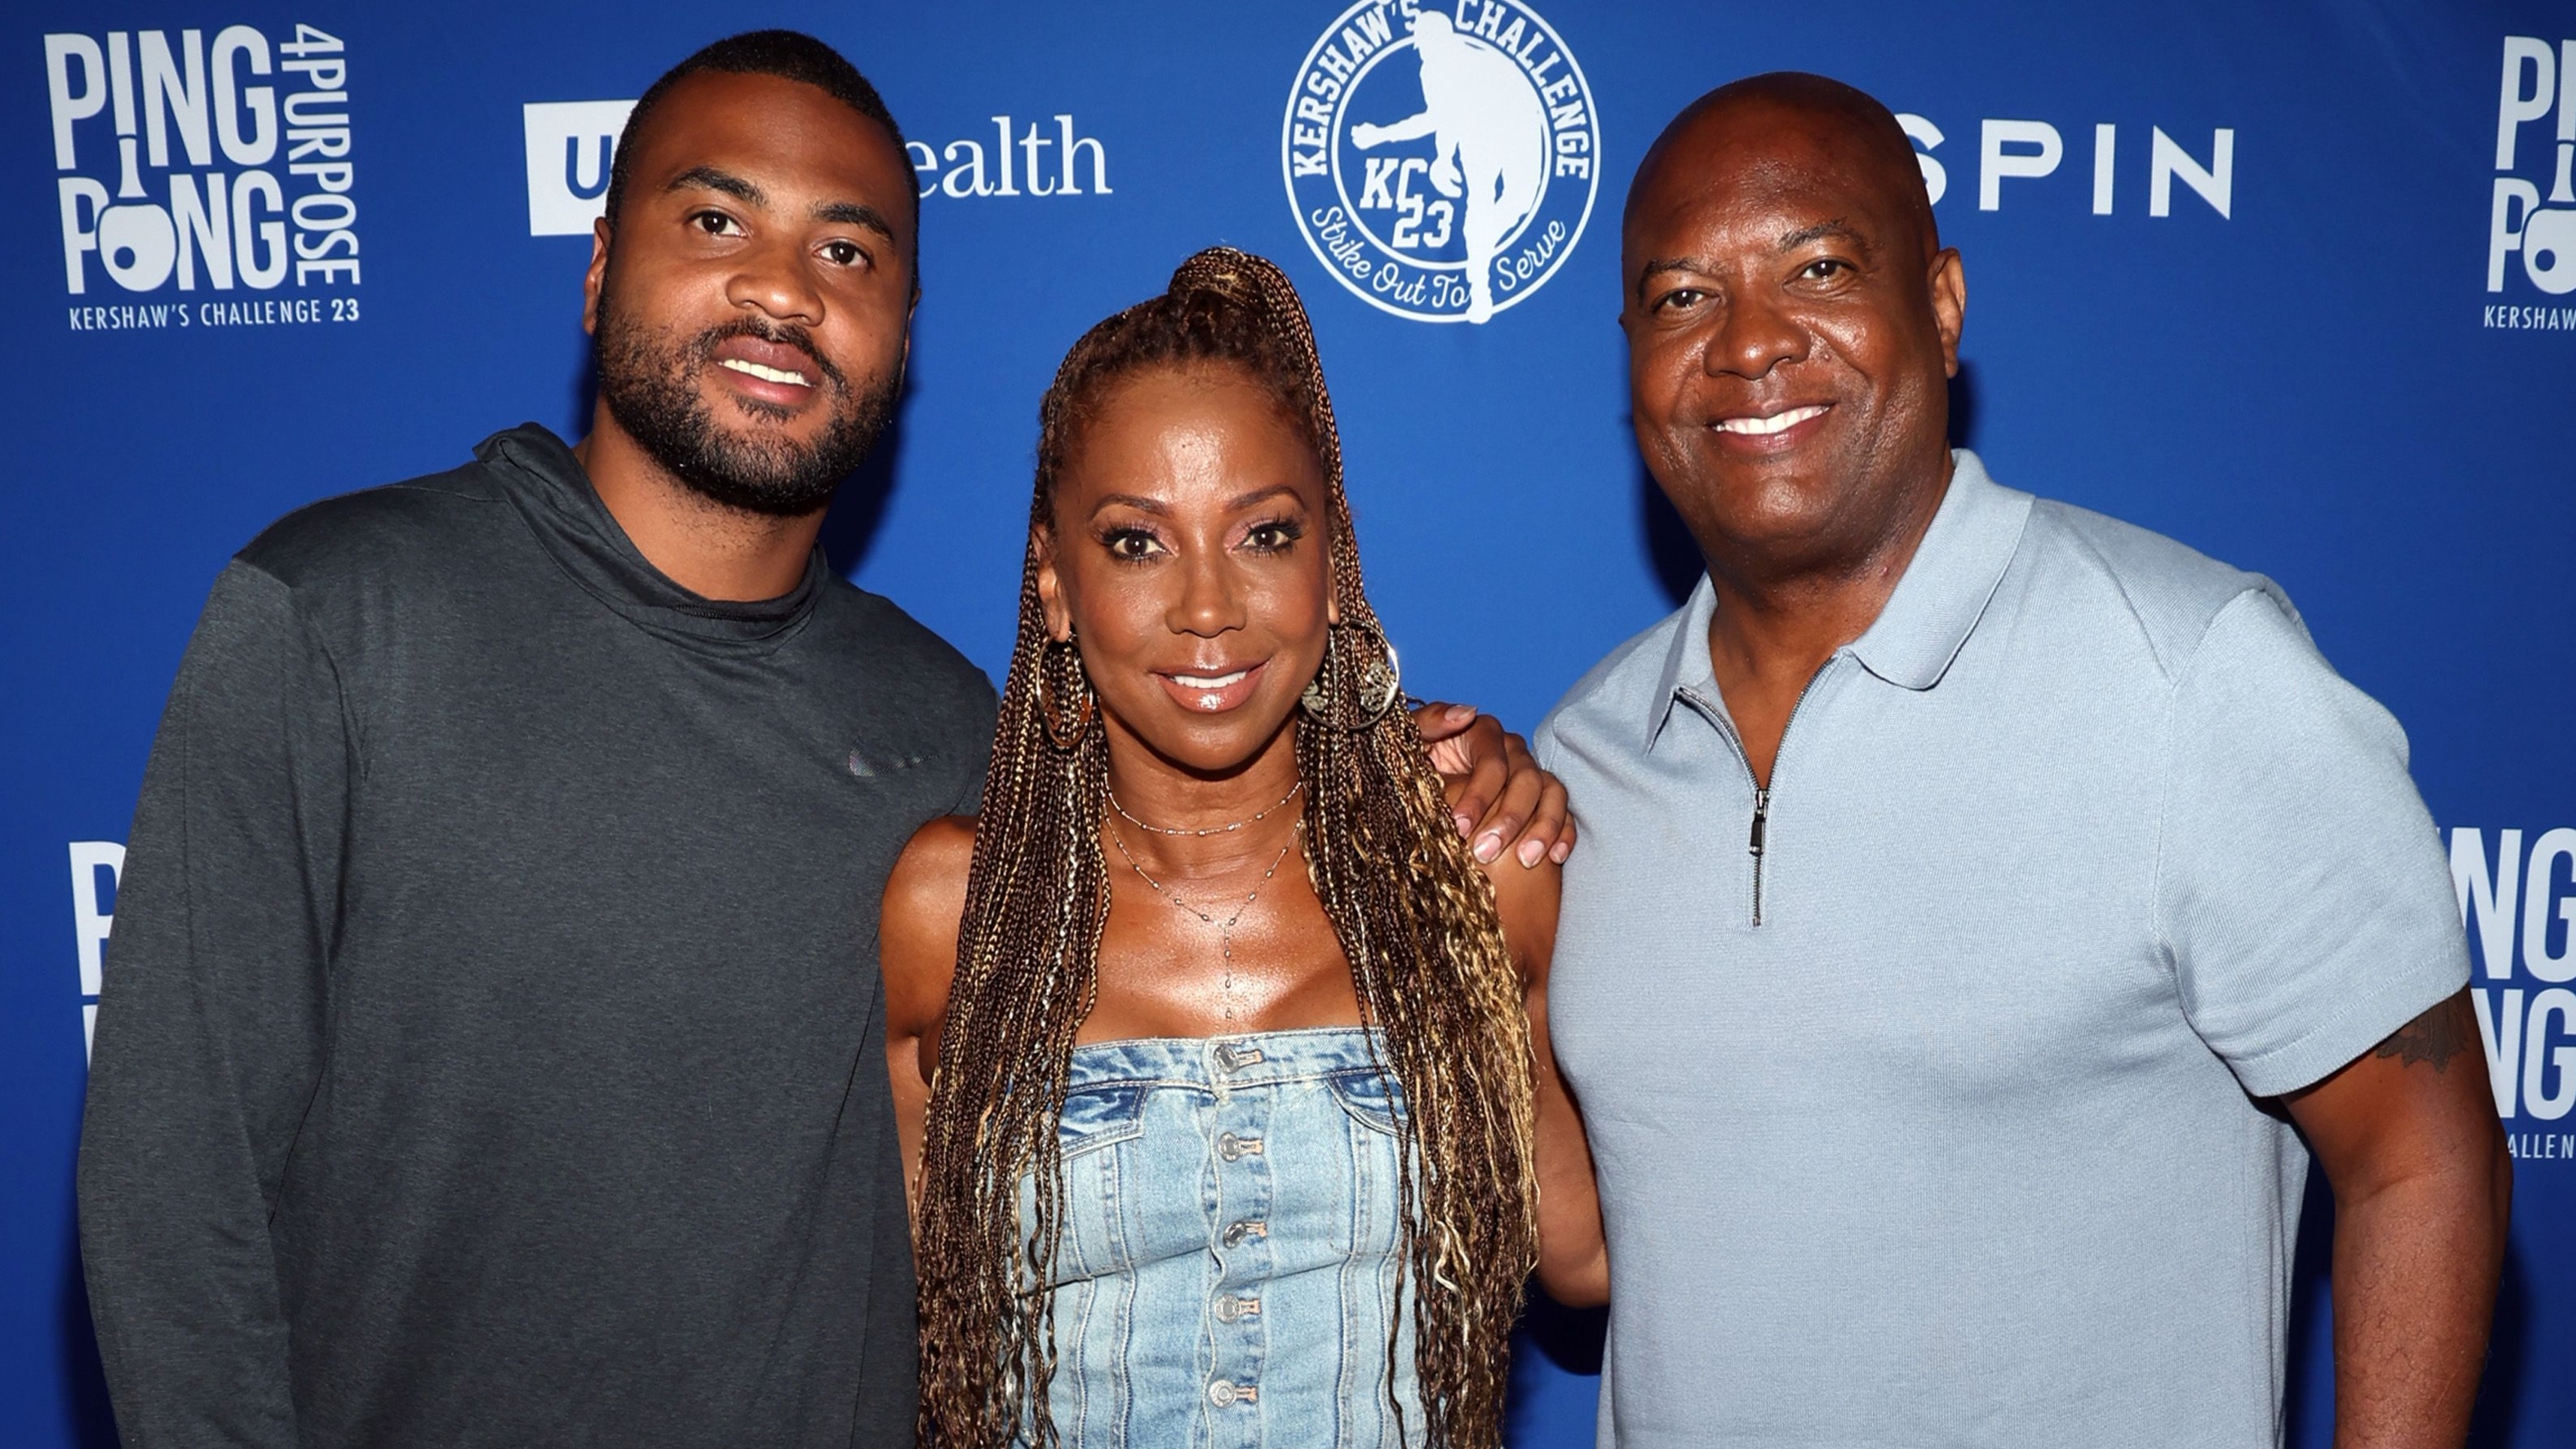 Holly Robinson Peete was ‘ready to leave’ husband Rodney amid their son’s autism diagnosis